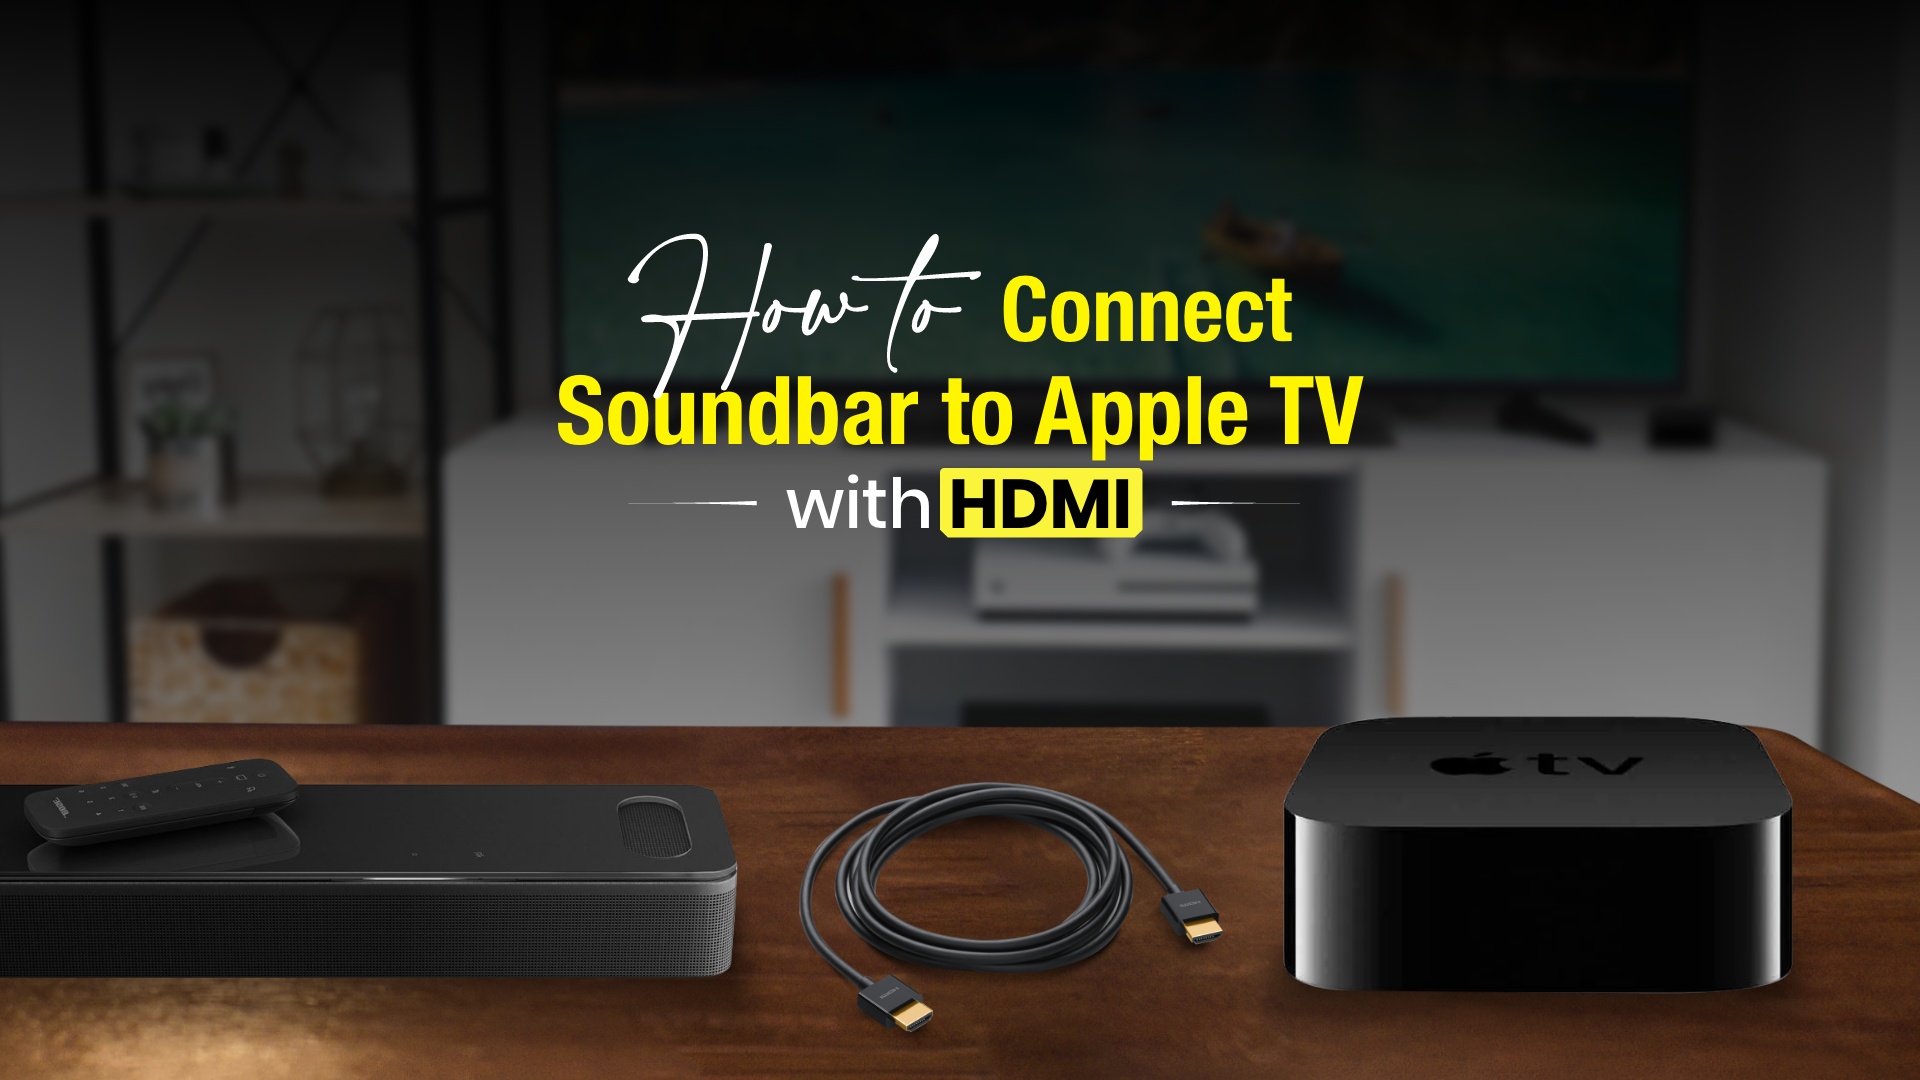 How to Connect Soundbar to Apple TV with HDMI